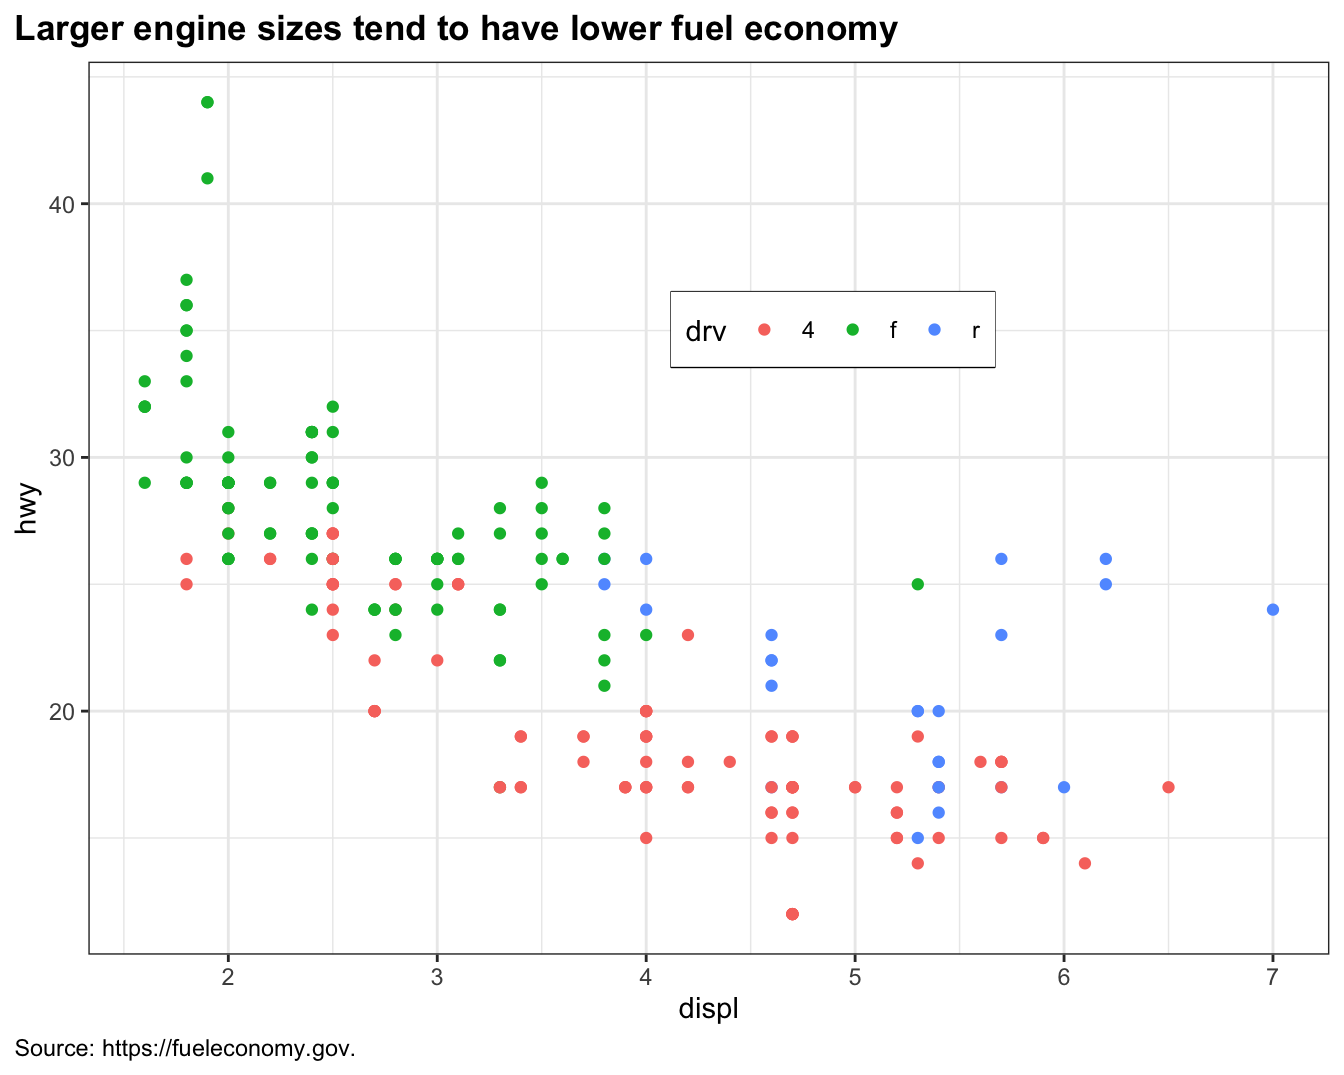 Scatterplot of highway fuel efficiency versus engine size of cars, colored
by drive. The plot is titled 'Larger engine sizes tend to have lower fuel
economy' with the caption pointing to the source of the data, fueleconomy.gov.
The caption and title are left justified, the legend is inside of the plot
with a black border.